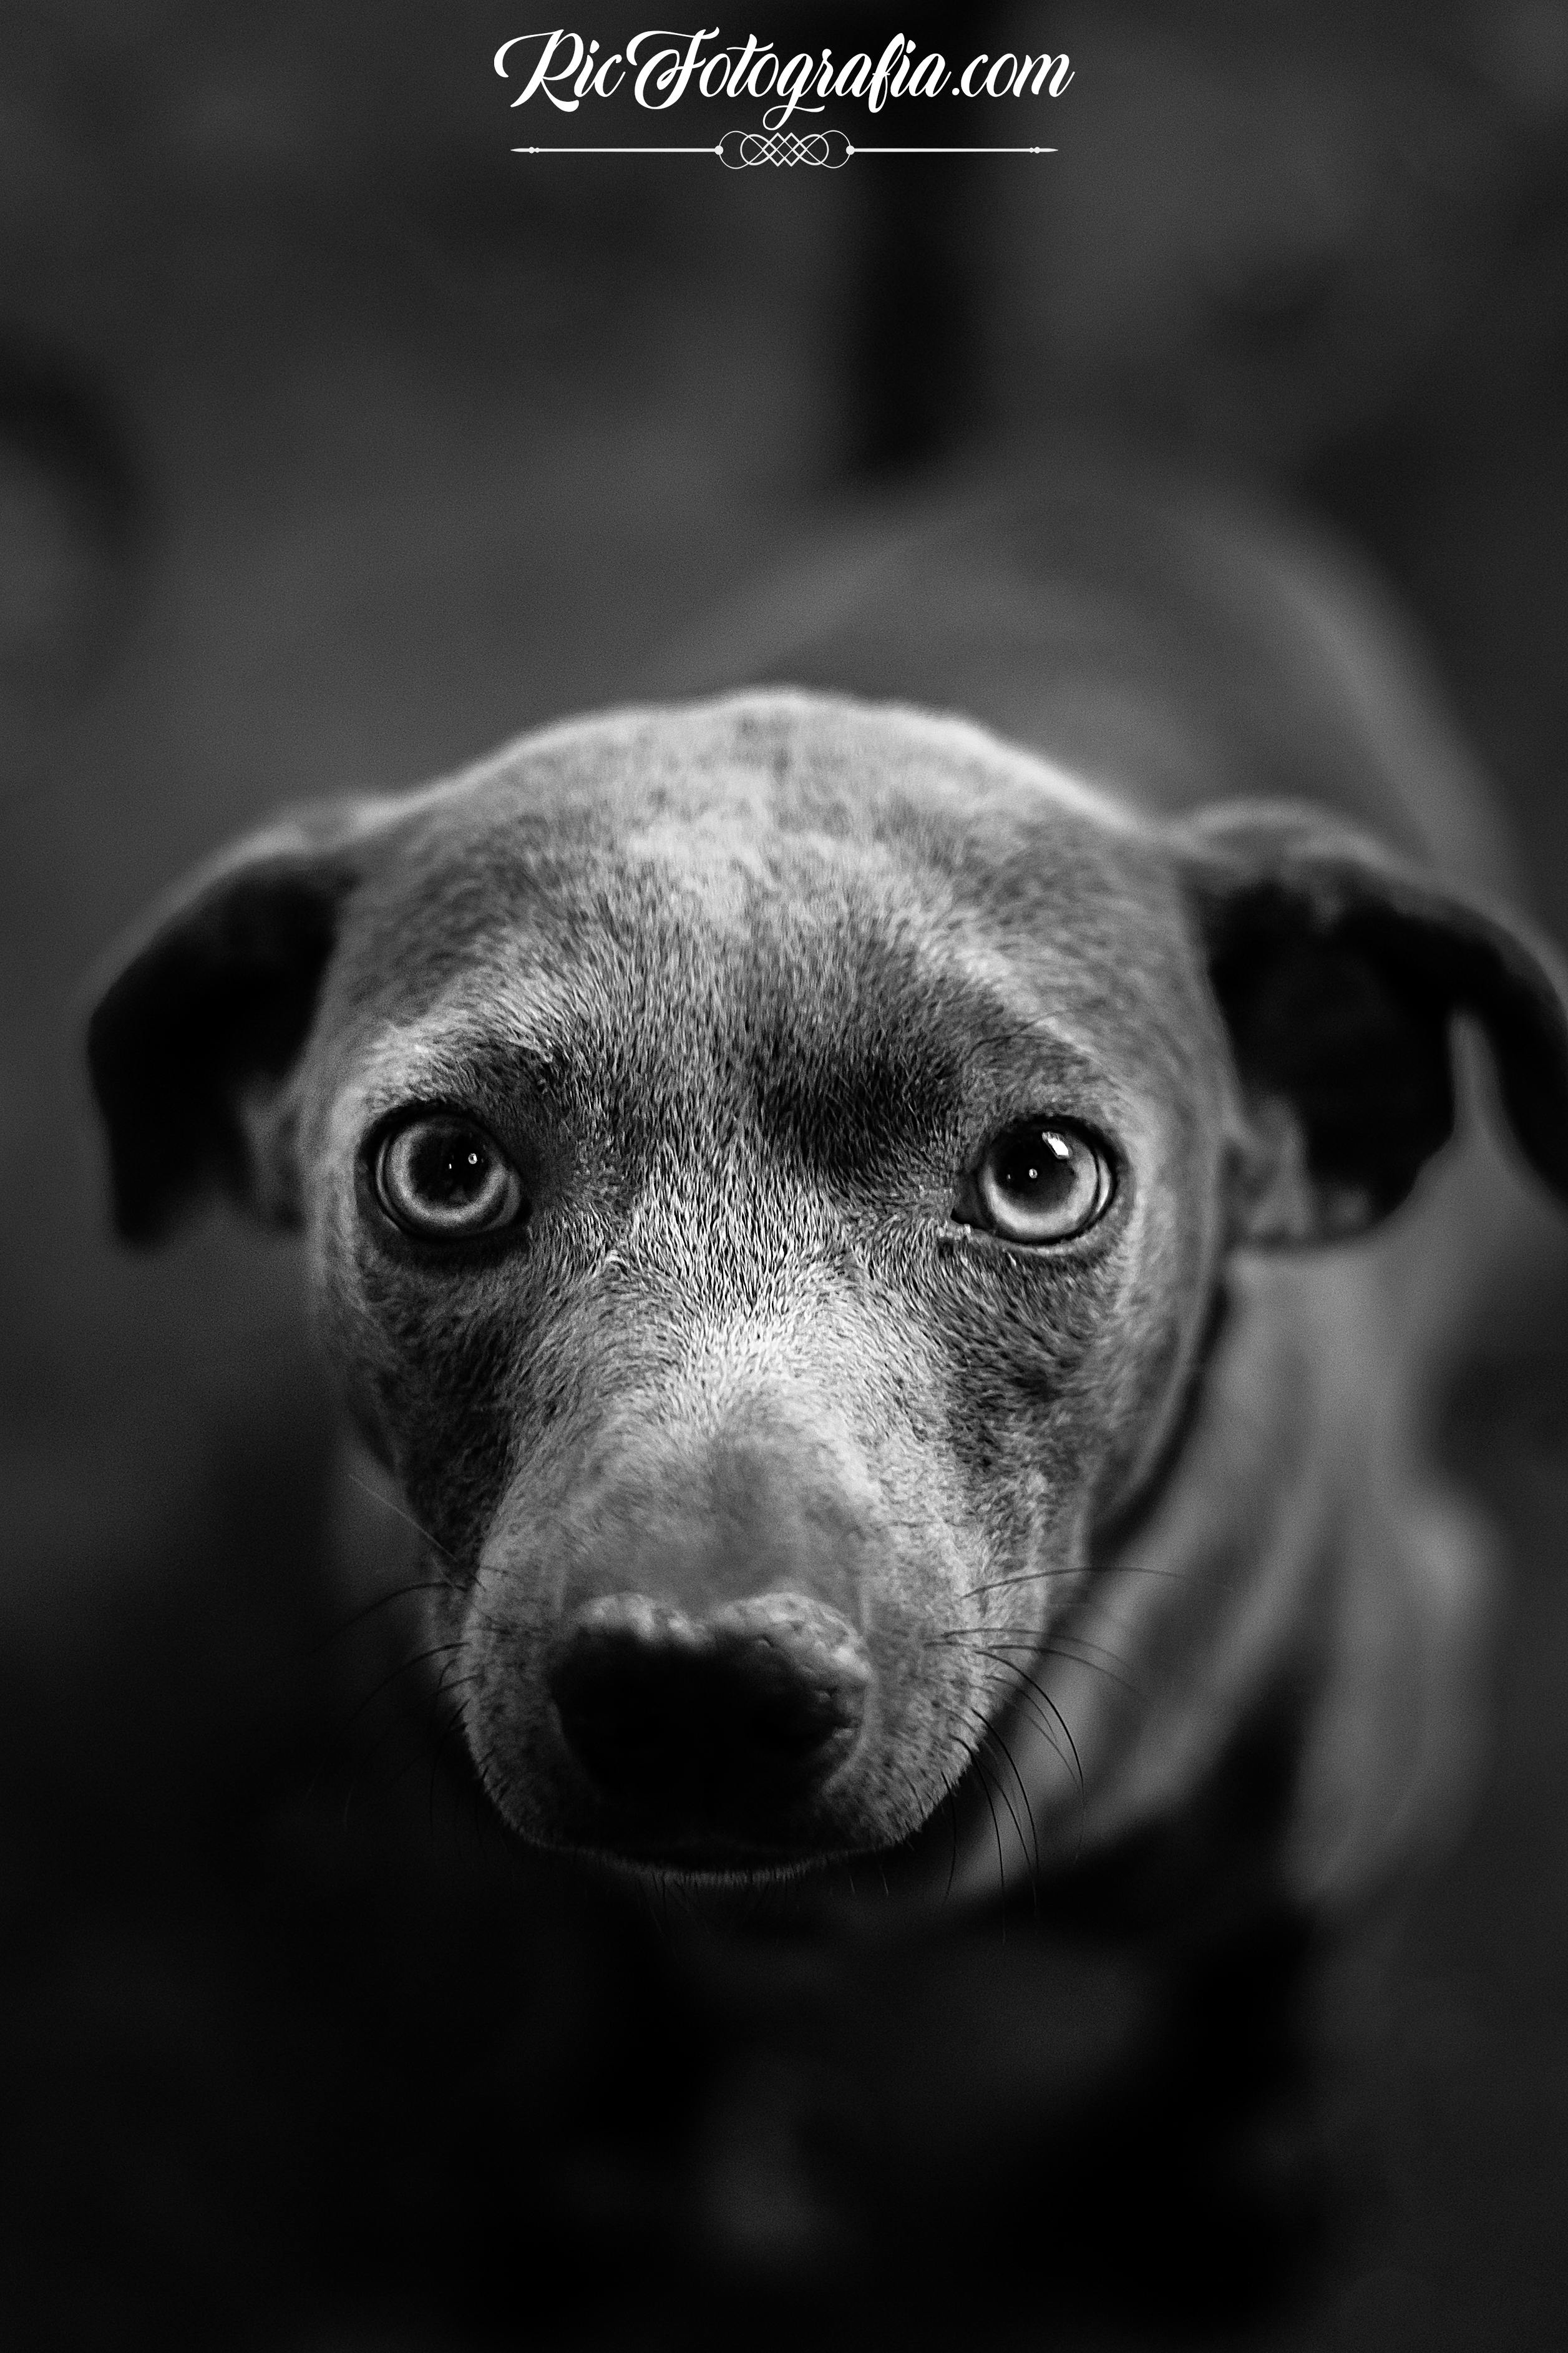 Free stock photo of black and white, dog, picture - Stock Image ...